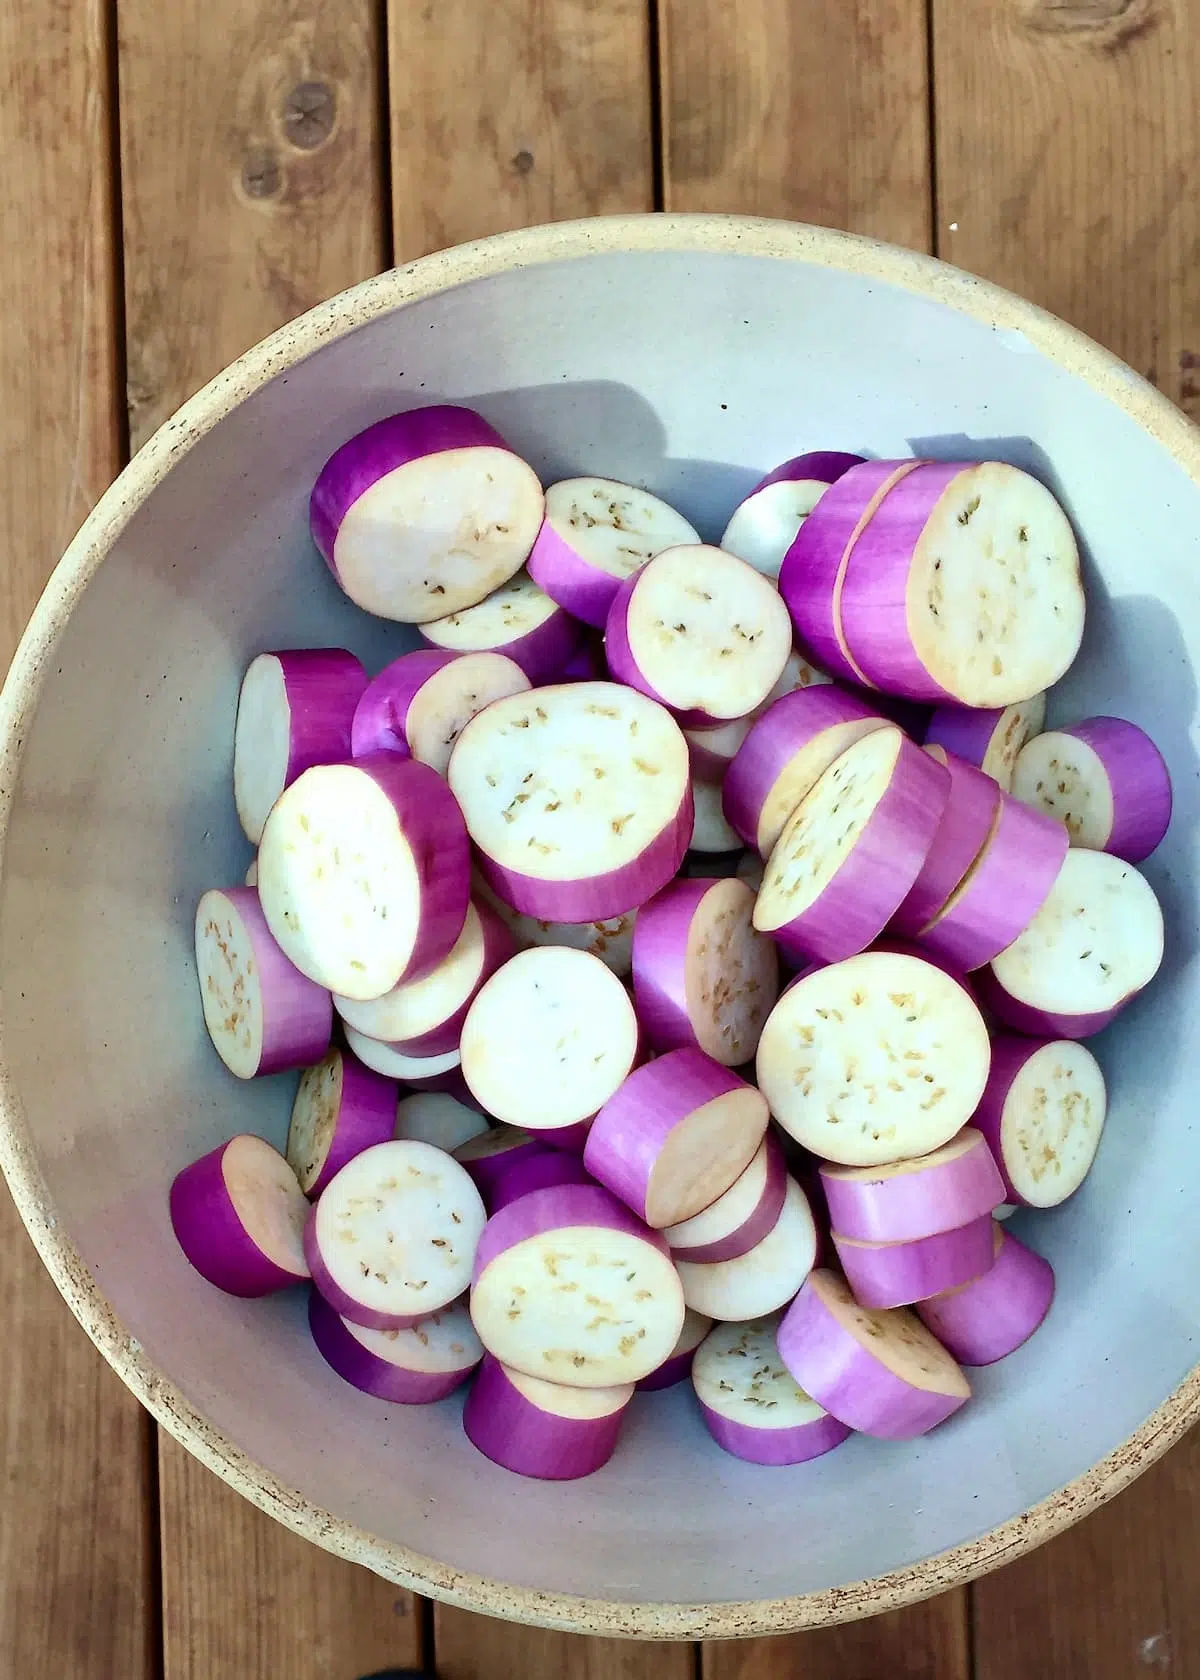 a bowl of uncooked eggplant.